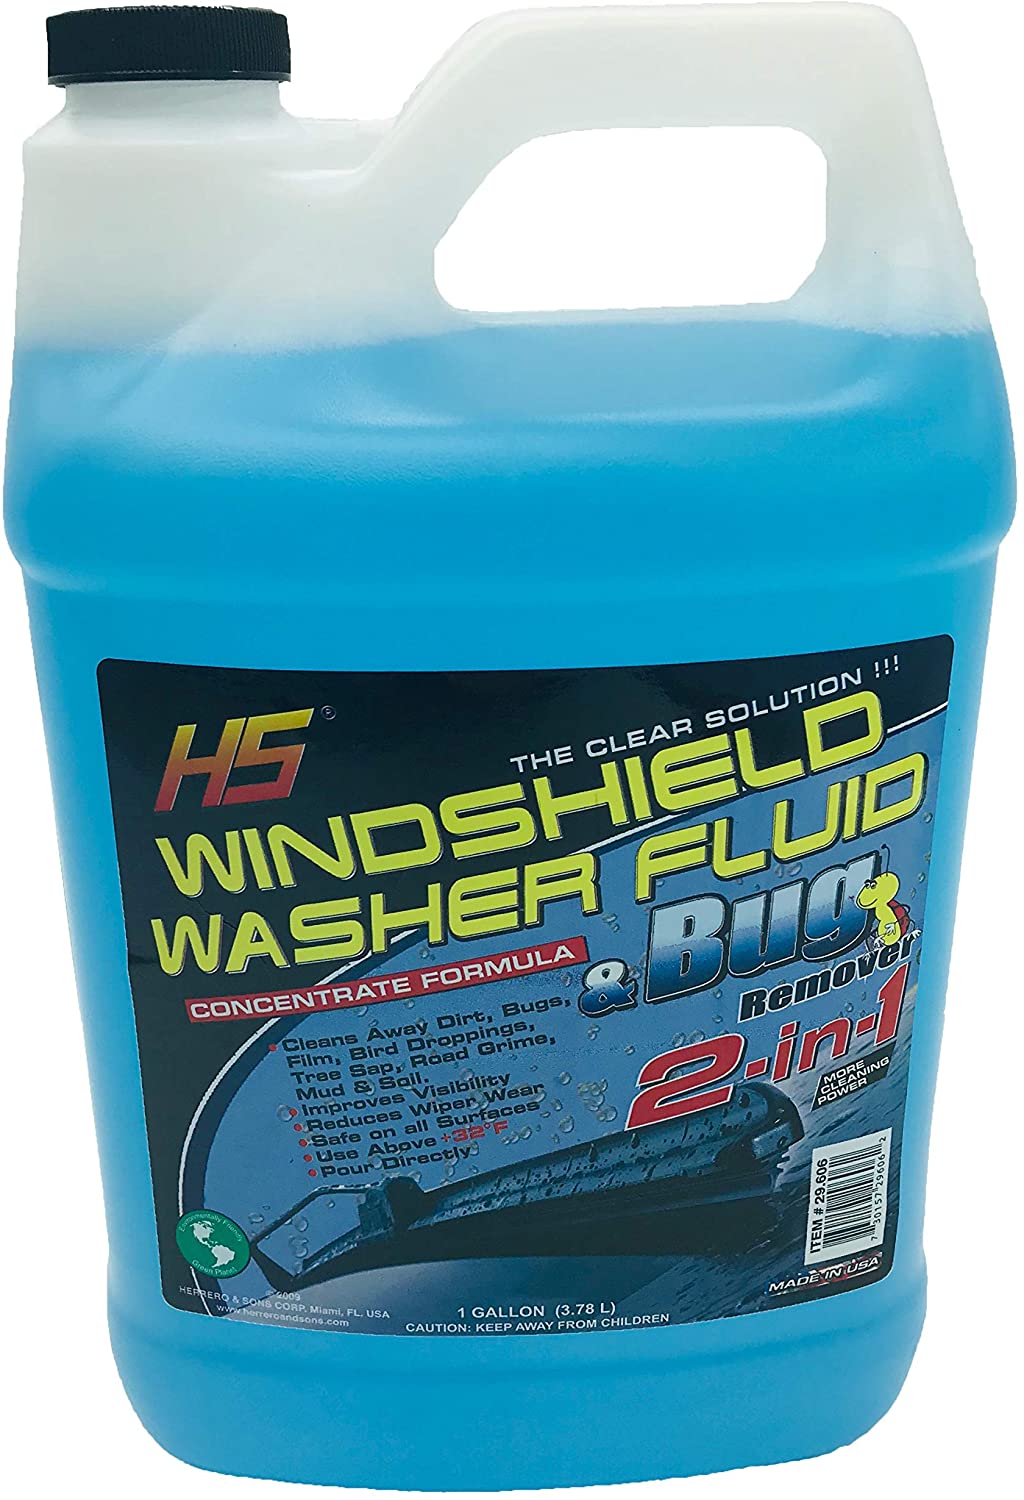 Windshield Washer Fluid Code Cracked! = water + ethanol, Page 2